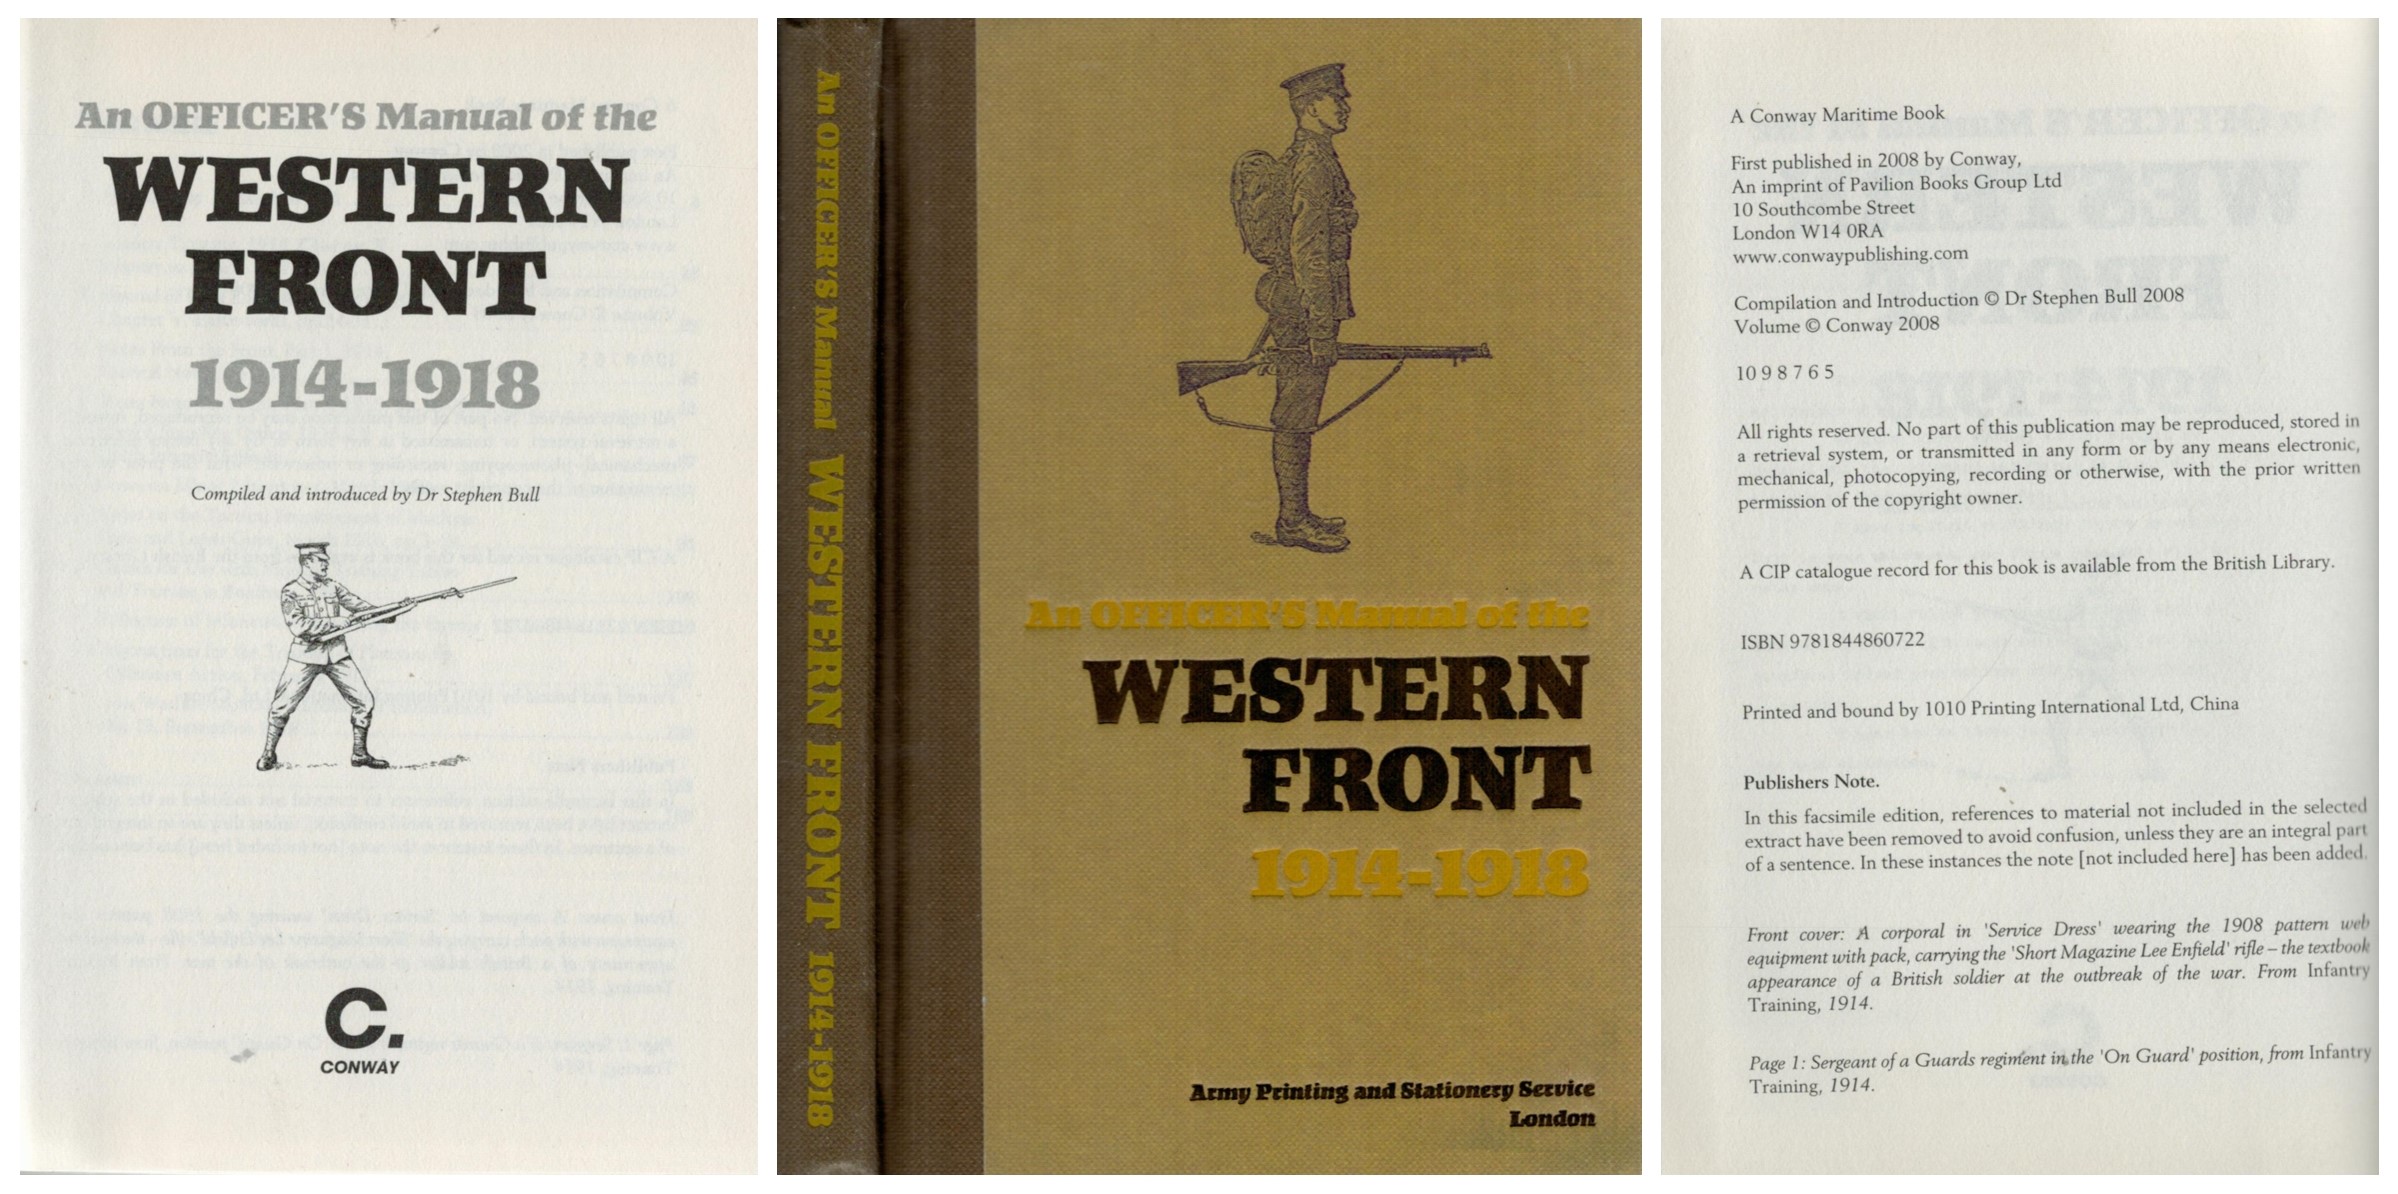 An Officer's Manual of the Western Front 1914-1918 Hardcover book unsigned. Complied and - Image 3 of 3